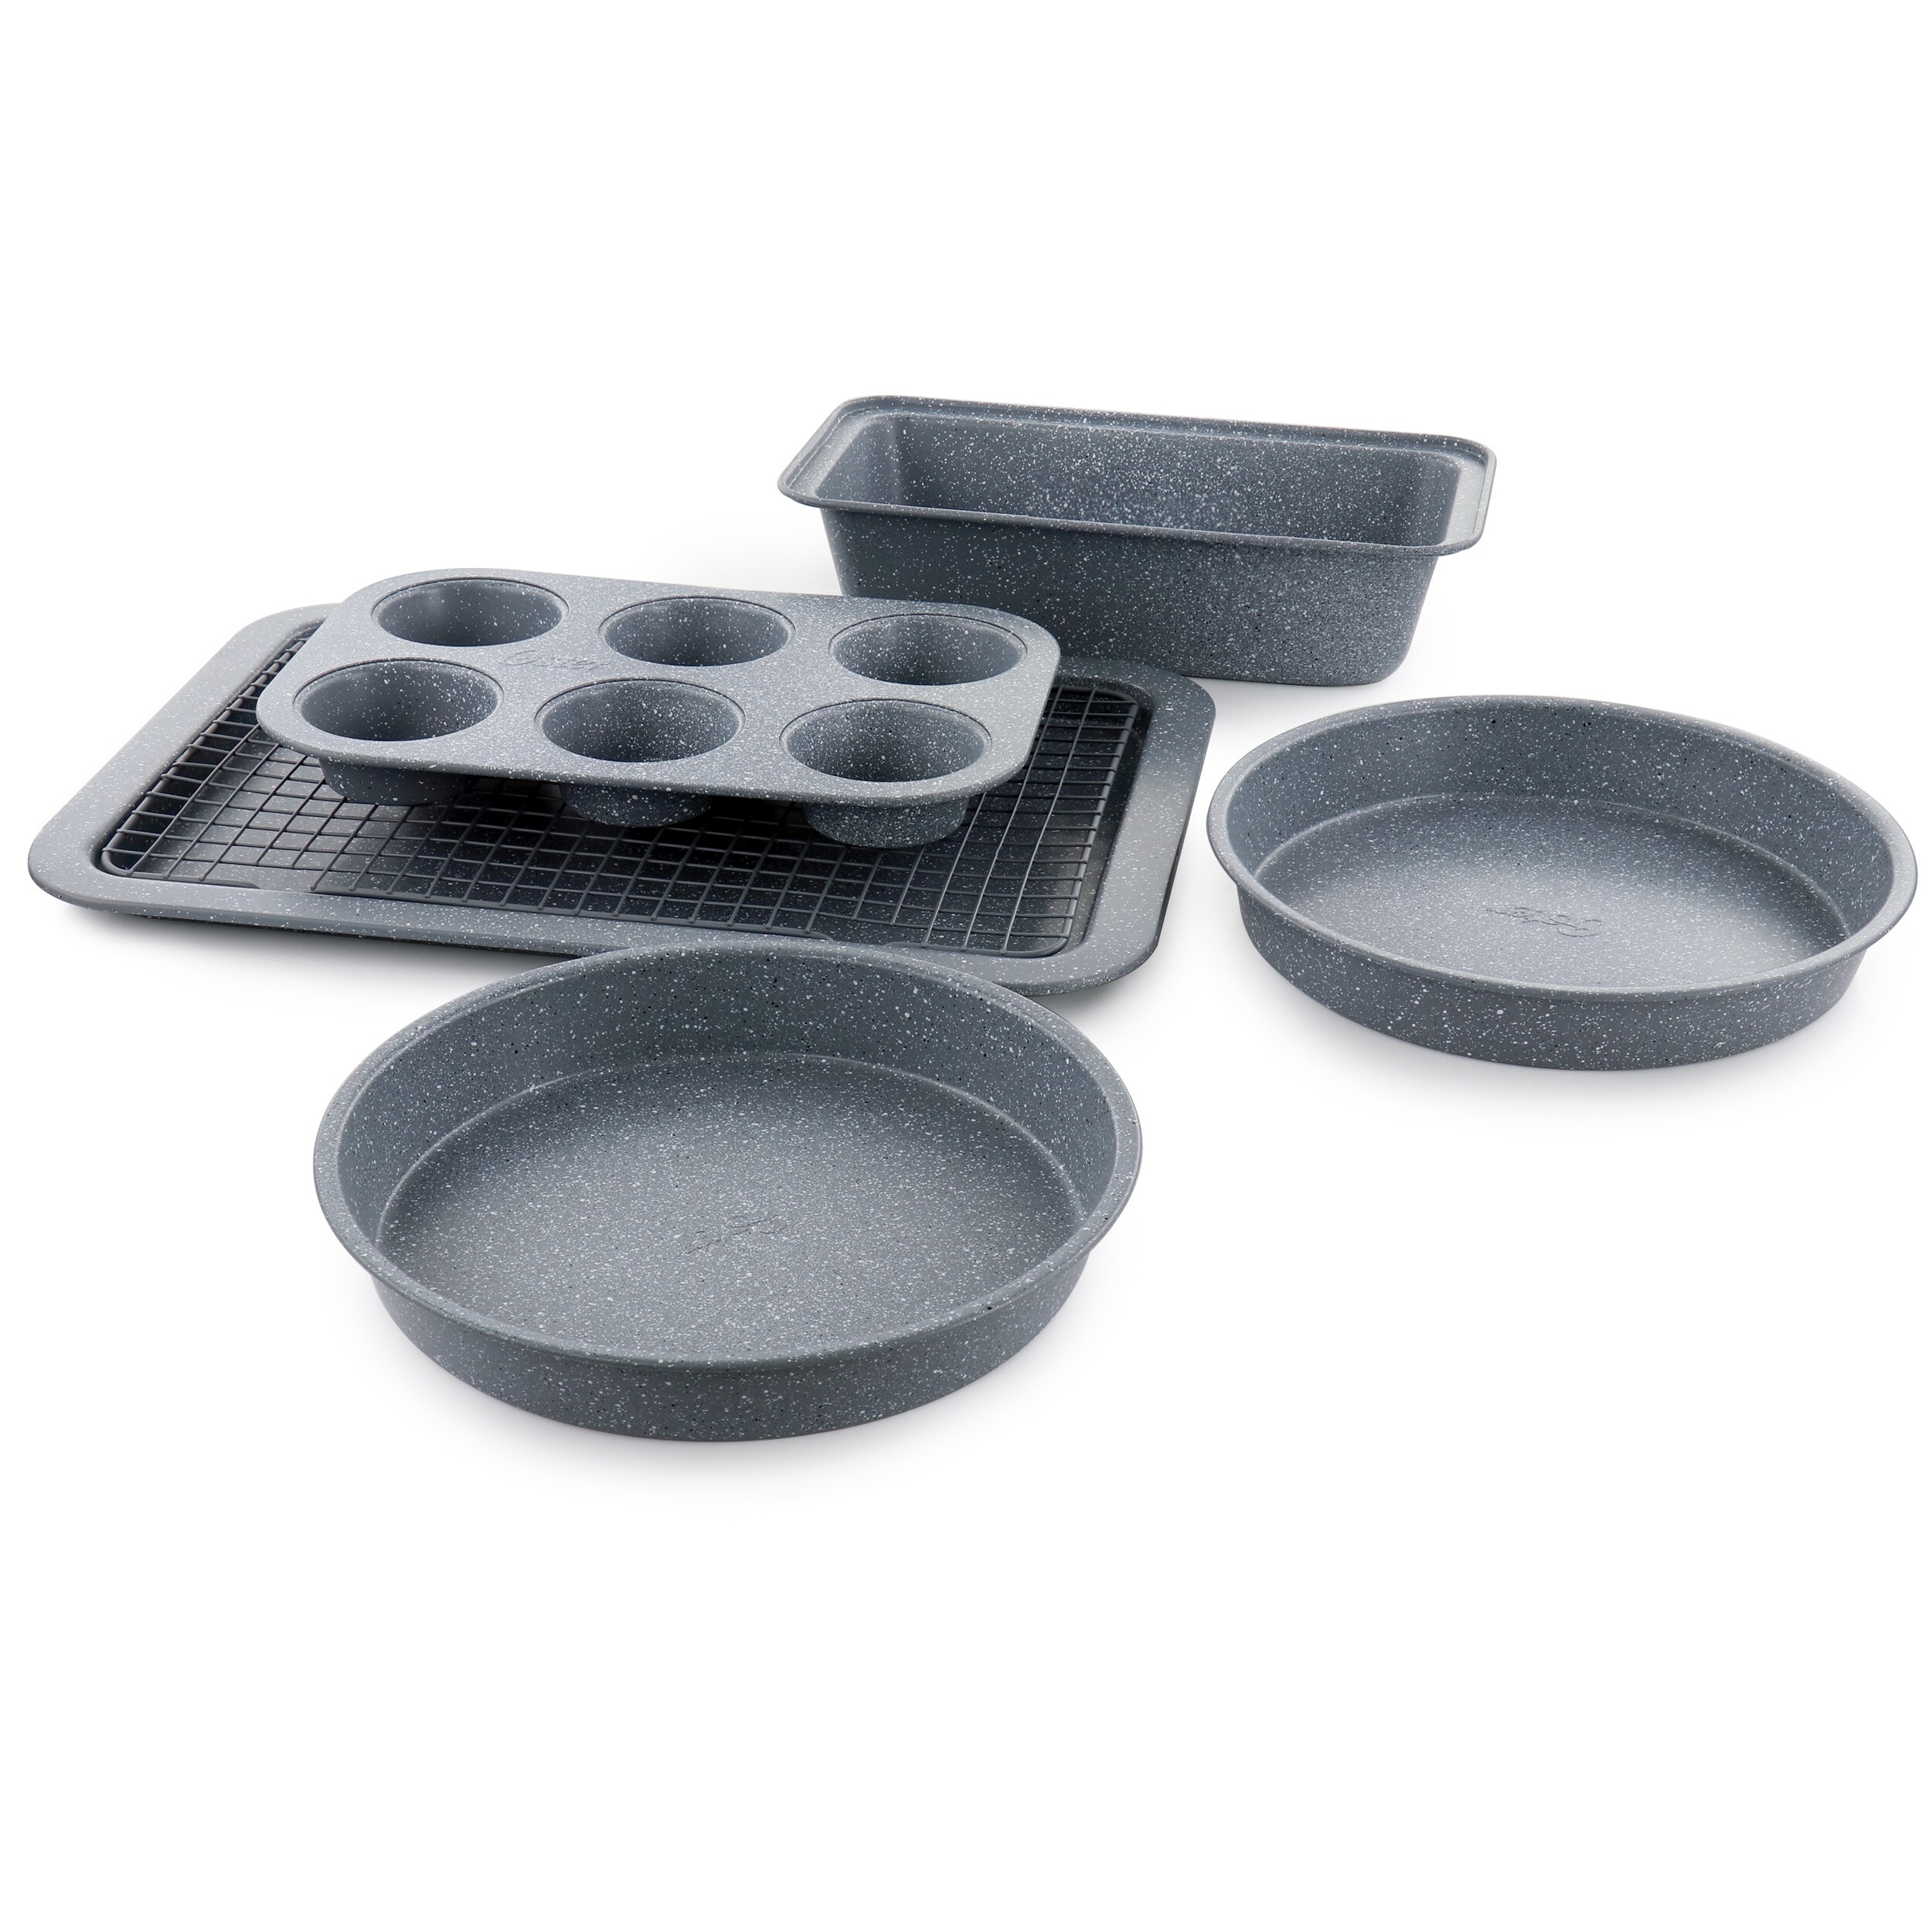 https://ak1.ostkcdn.com/images/products/is/images/direct/bfcf02a0d1f244895fc05d62d1c8dfd02ede9ada/Oster-Bastone-23-Piece-Nonstick-Cookware-Bakeware-Set-in-Speckled-Gray.jpg